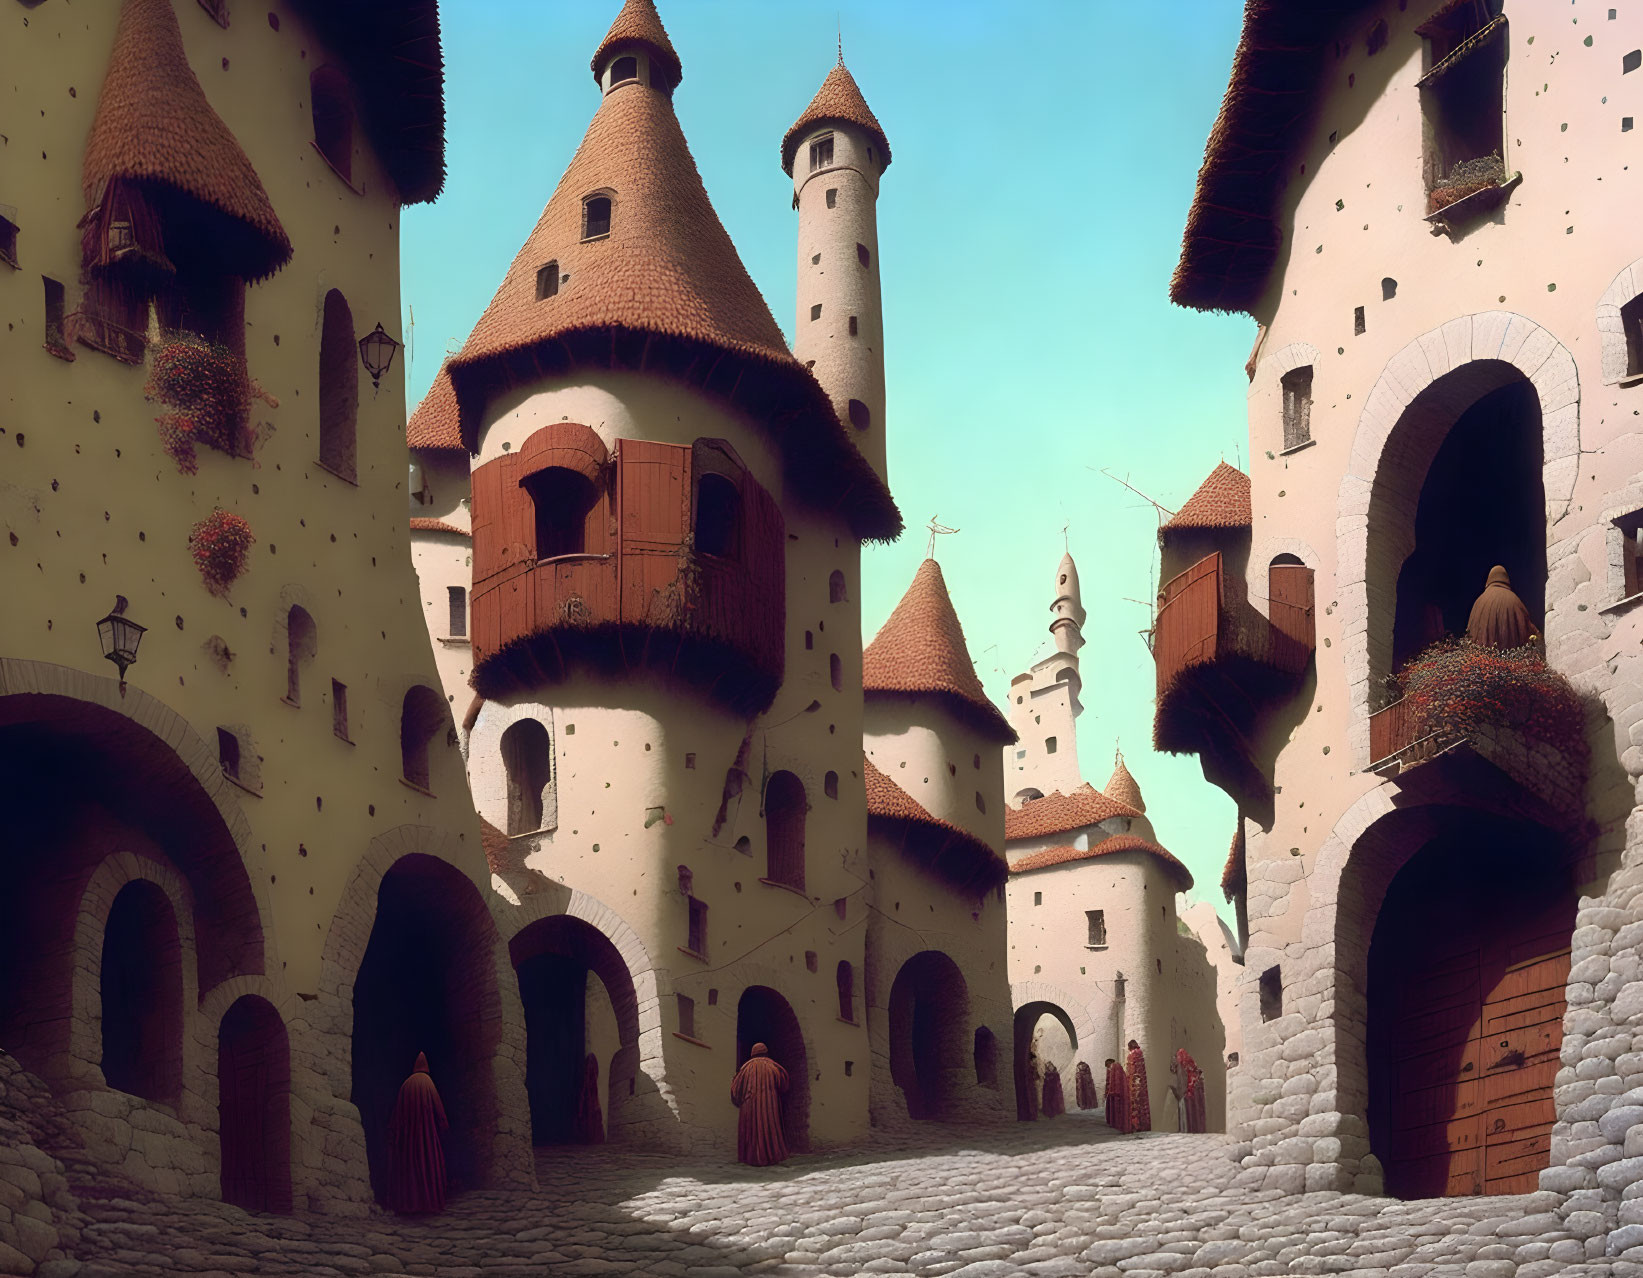 Medieval cobblestone street with whimsical towers and houses in serene European village